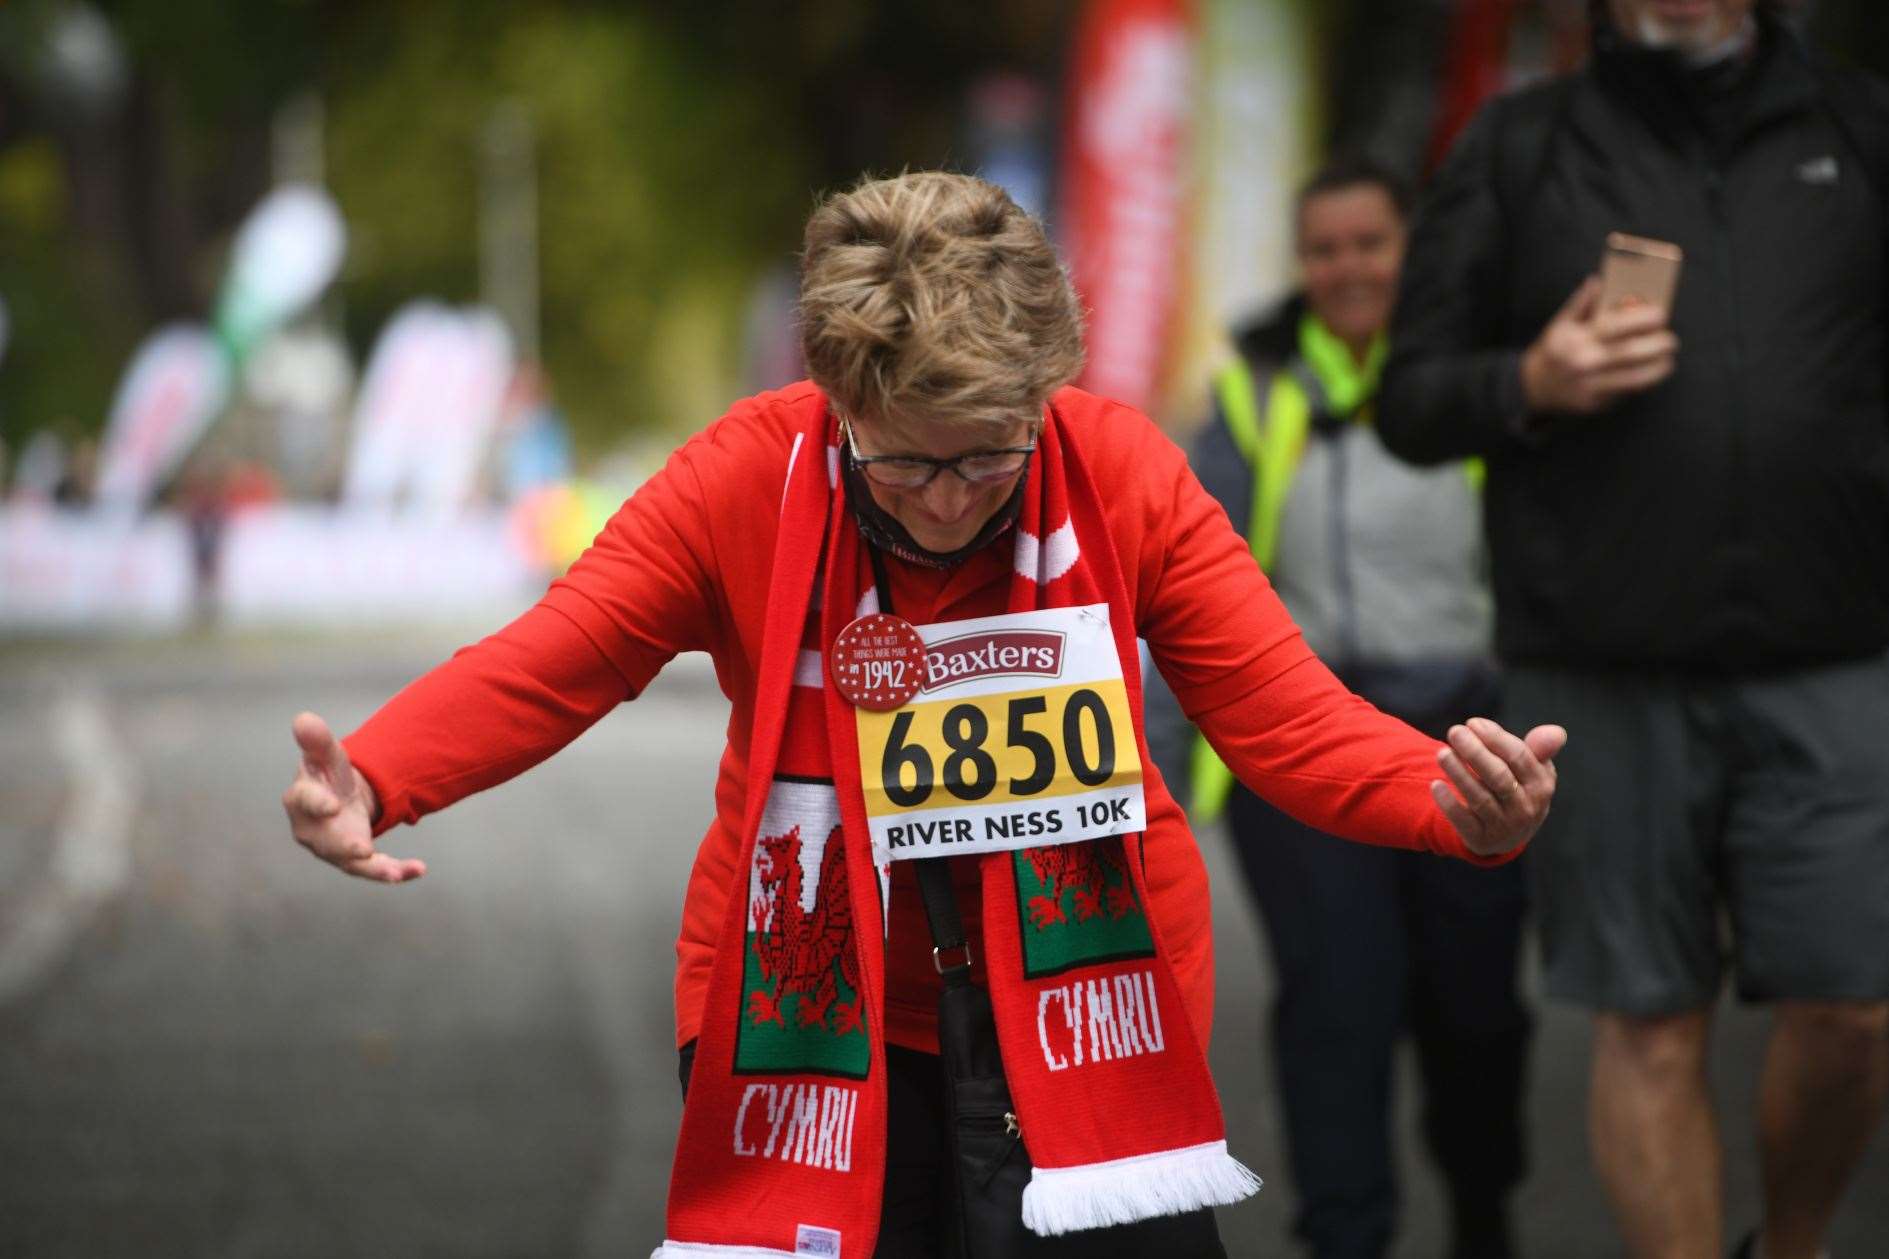 Hazel Kelly, 80 years old, taking a bow after finishing the 10k Picture: James Mackenzie